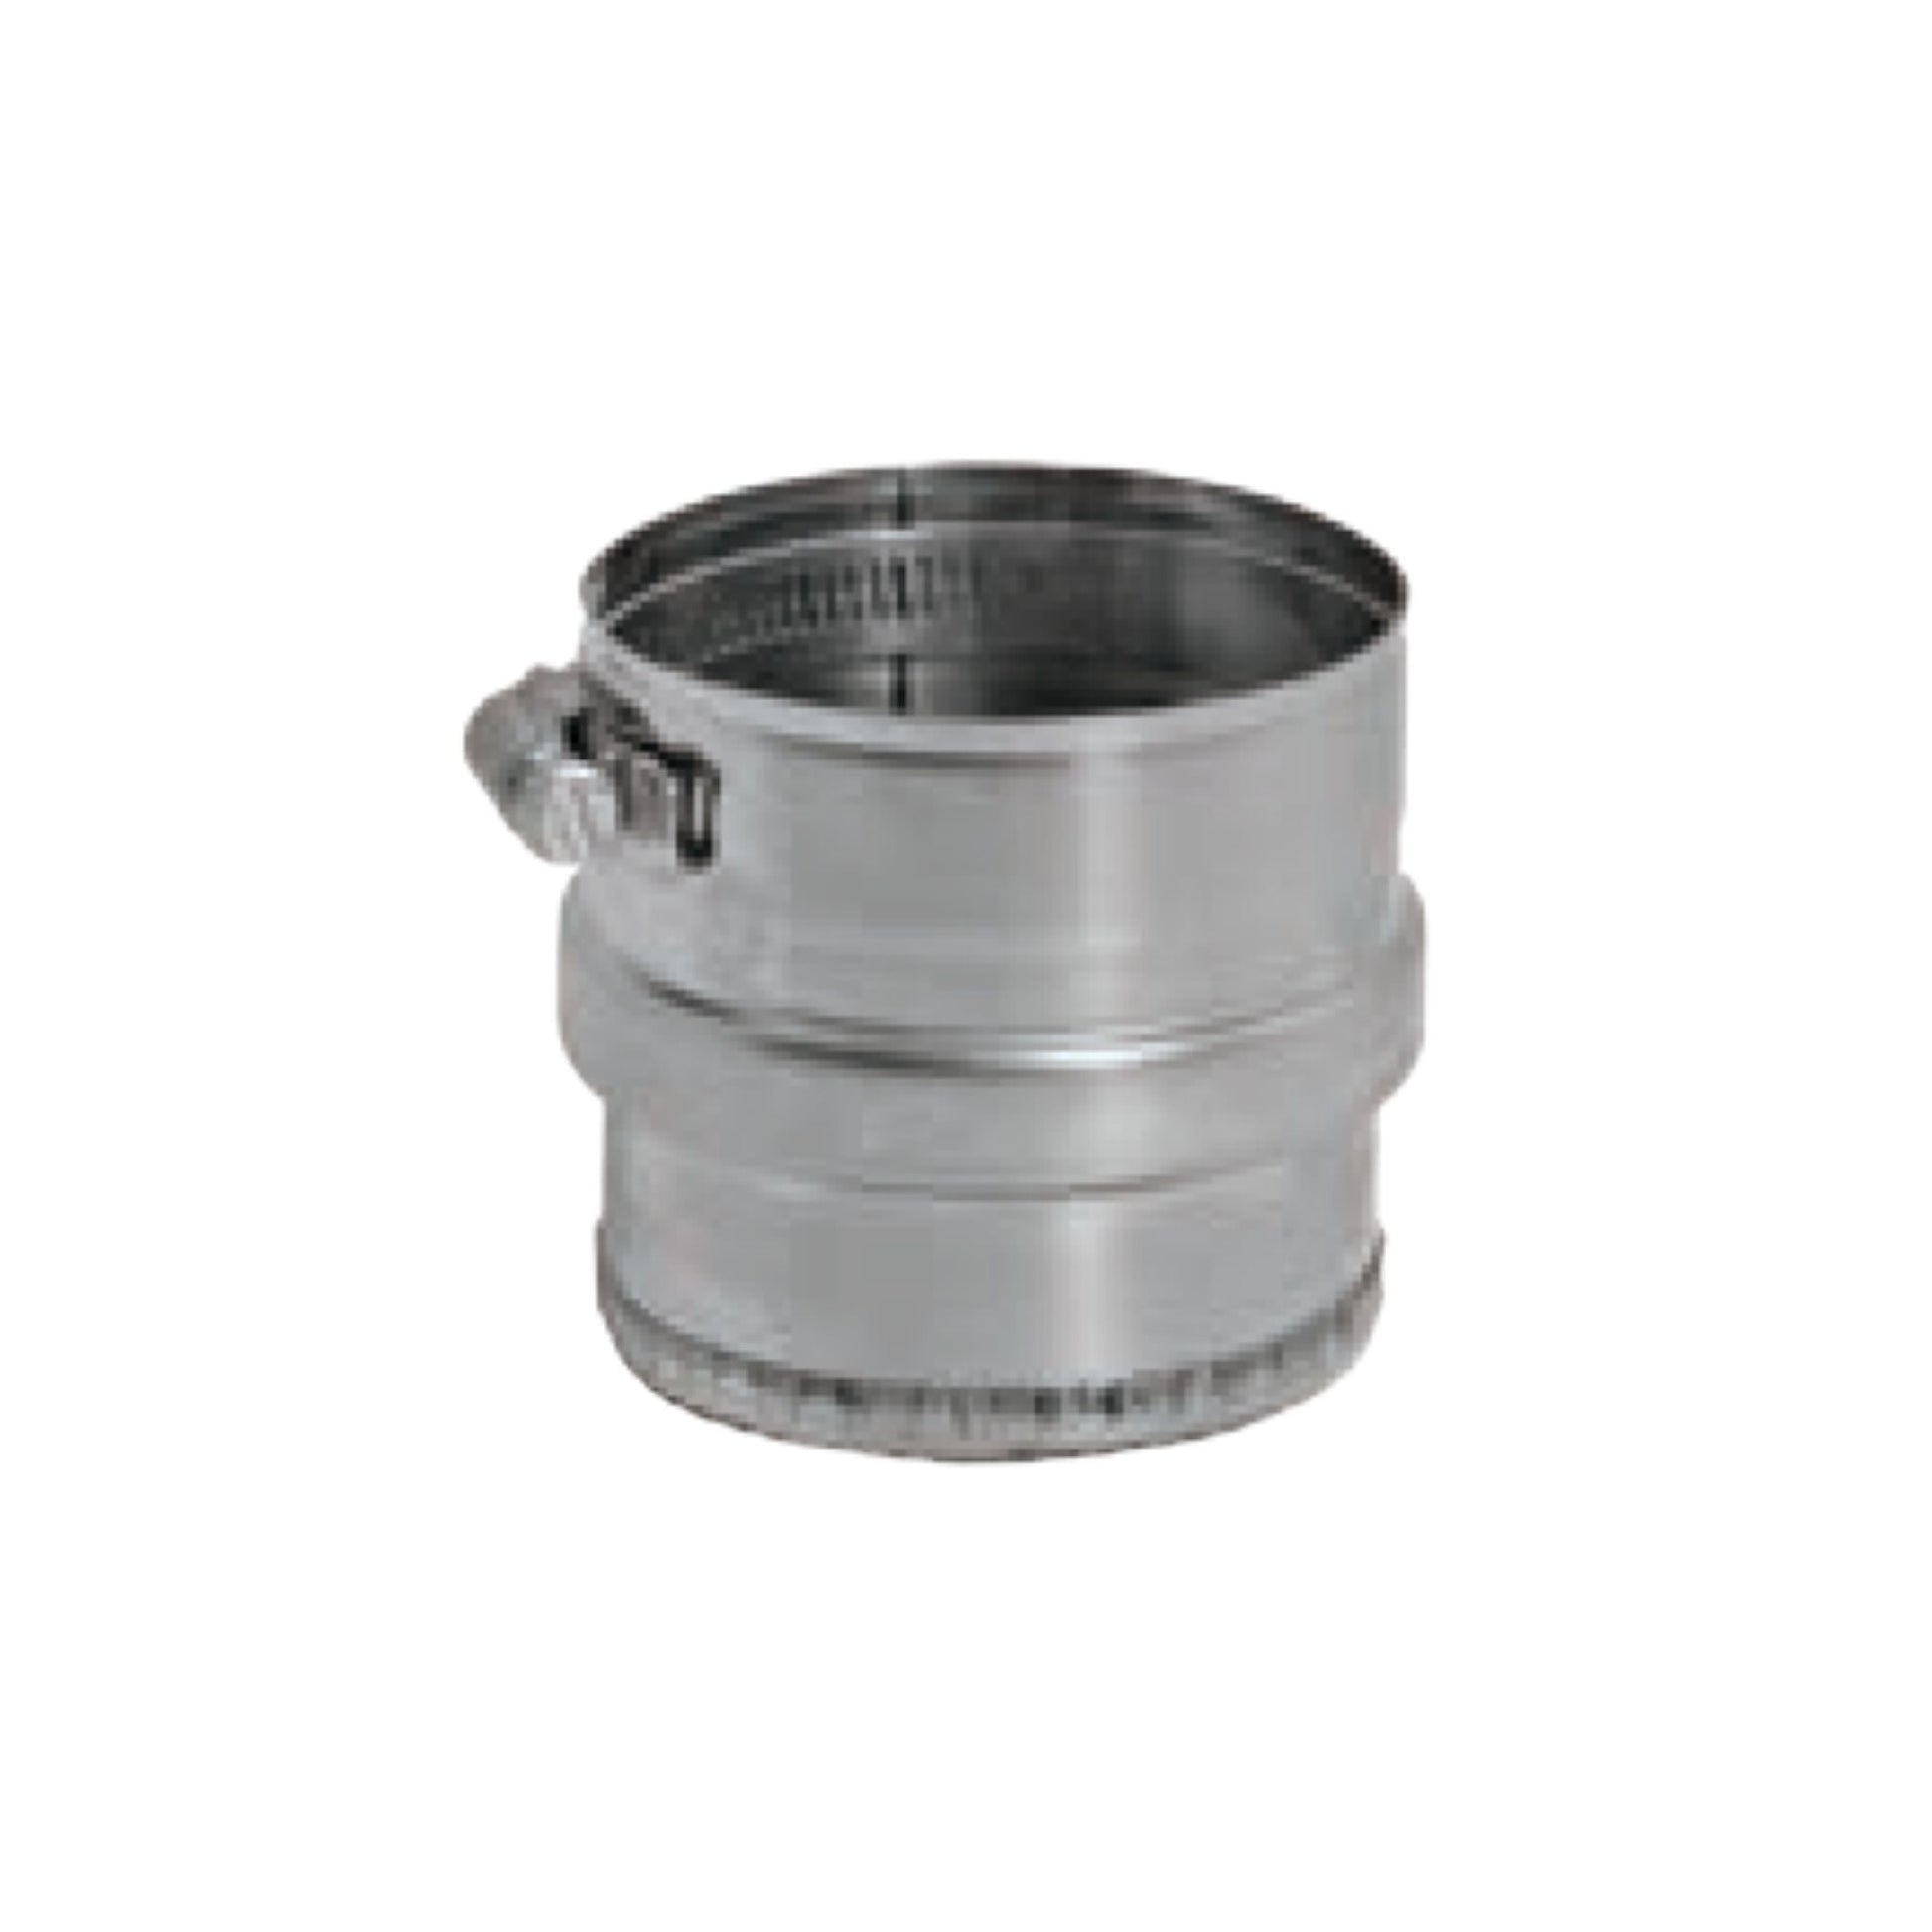 DuraVent FasNSeal 8" 316L Stainless Steel Tee Cap